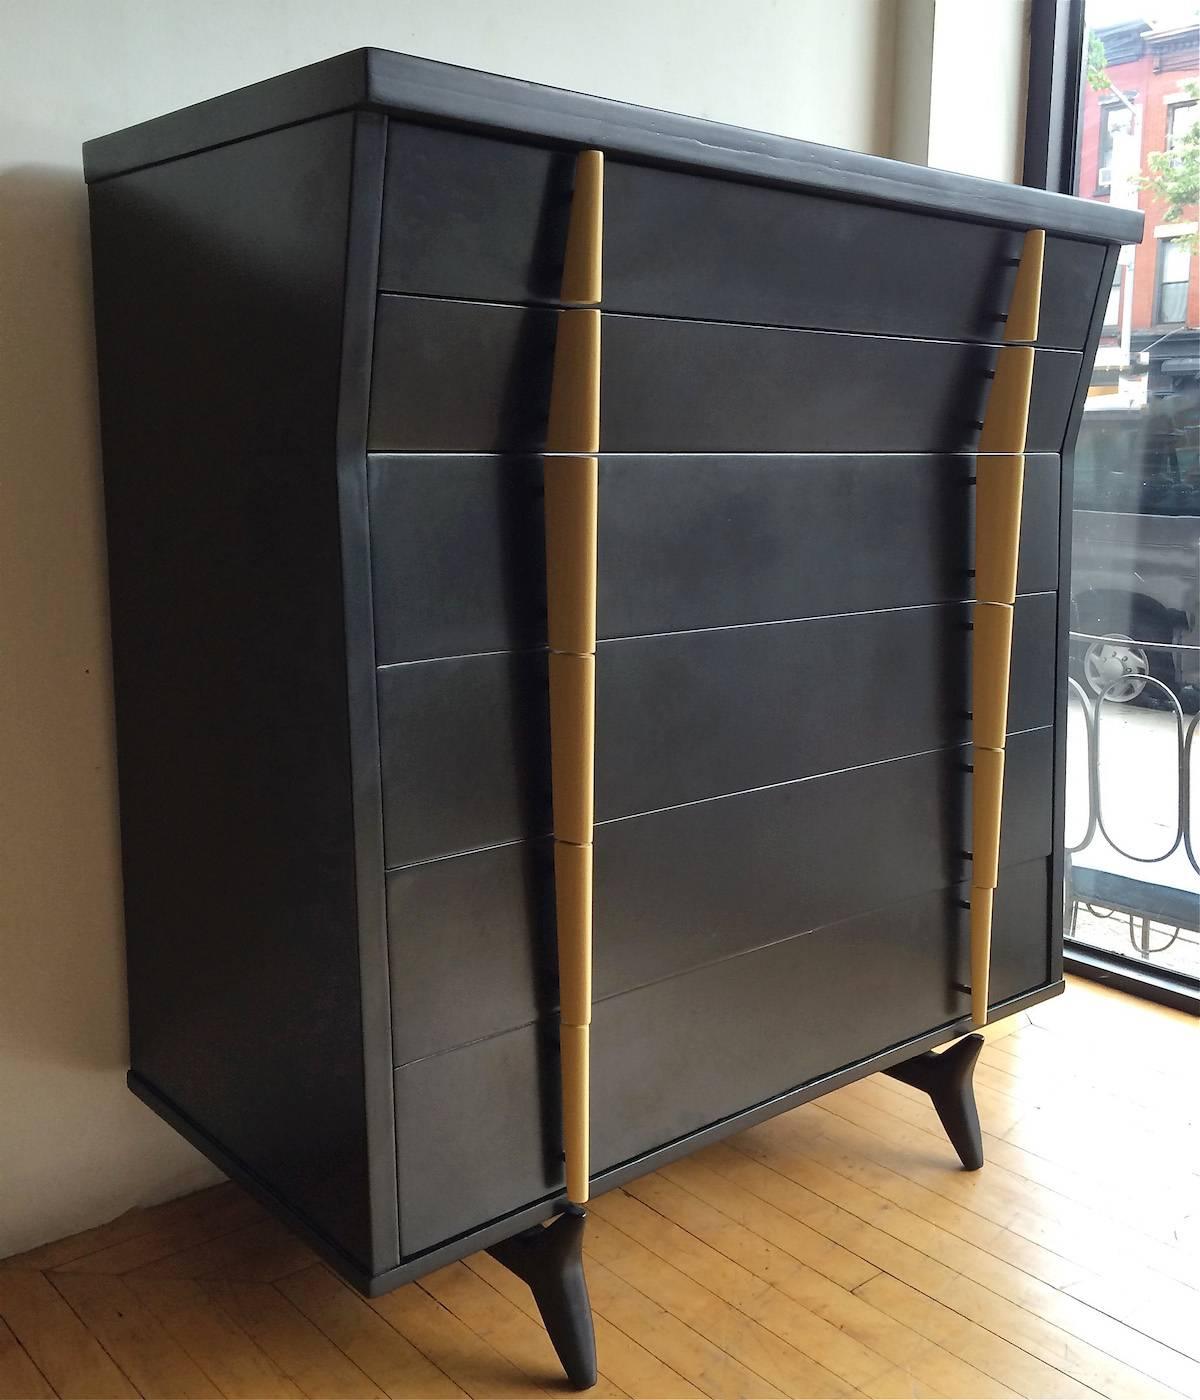 Mid-Century Modern, mahogany highboy dresser is lacquered black with contrasting ivory colored lacquered handles. Architectural profile and sculpted handles and feet make this a fantastic piece.